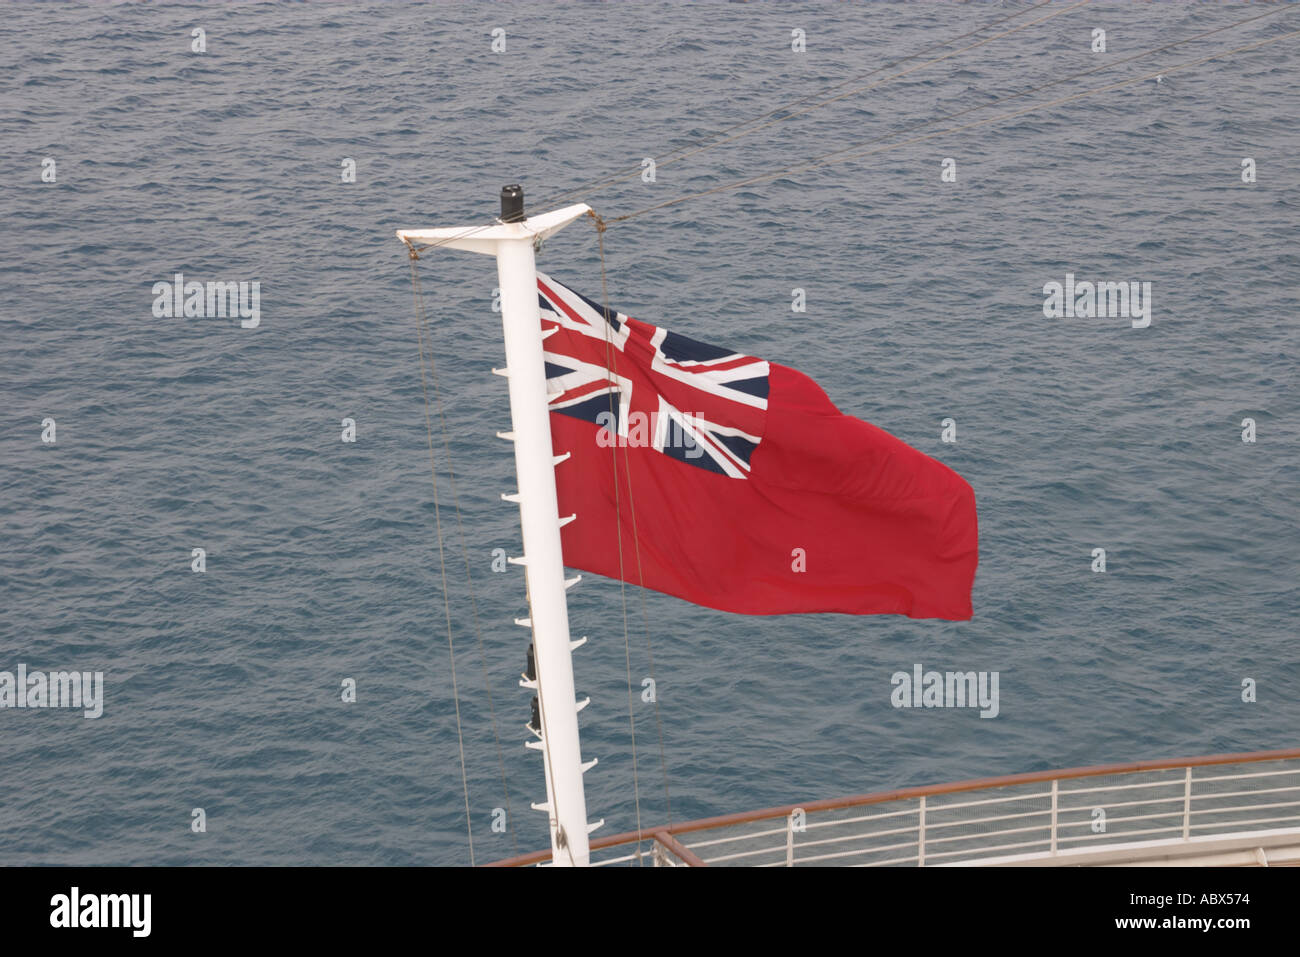 Red Ensign flag on mast Stock Photo